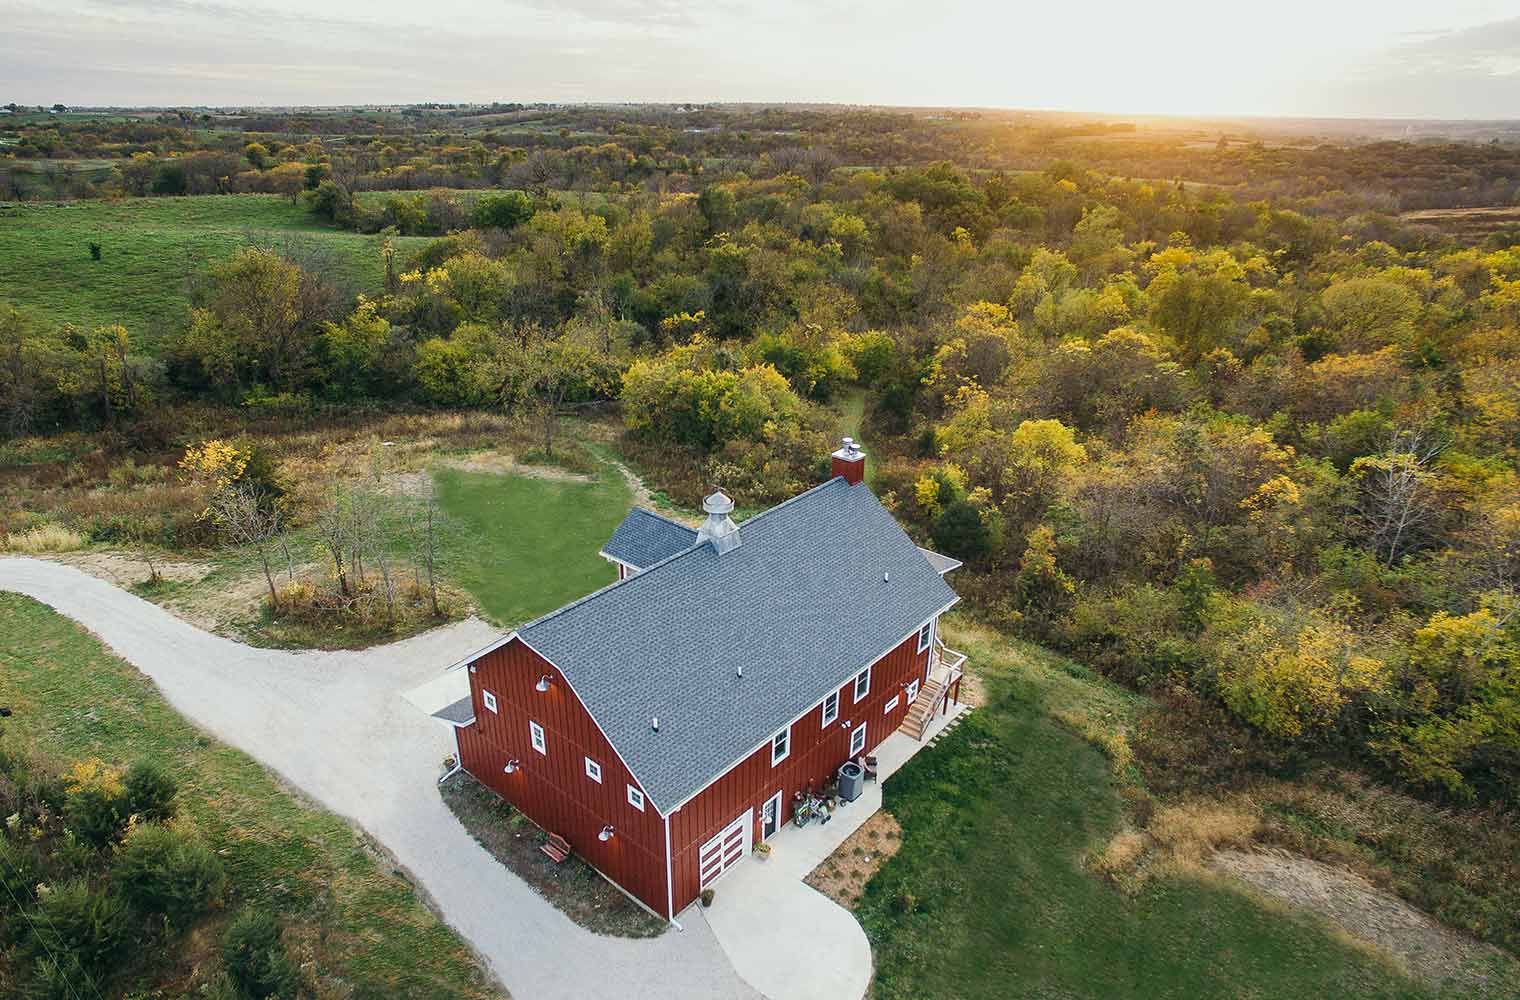 Custom new home by Silent Rivers of Des Moines is a barn style home in rural St. Charles, Iowa with scenic views of trees, open land and pastures